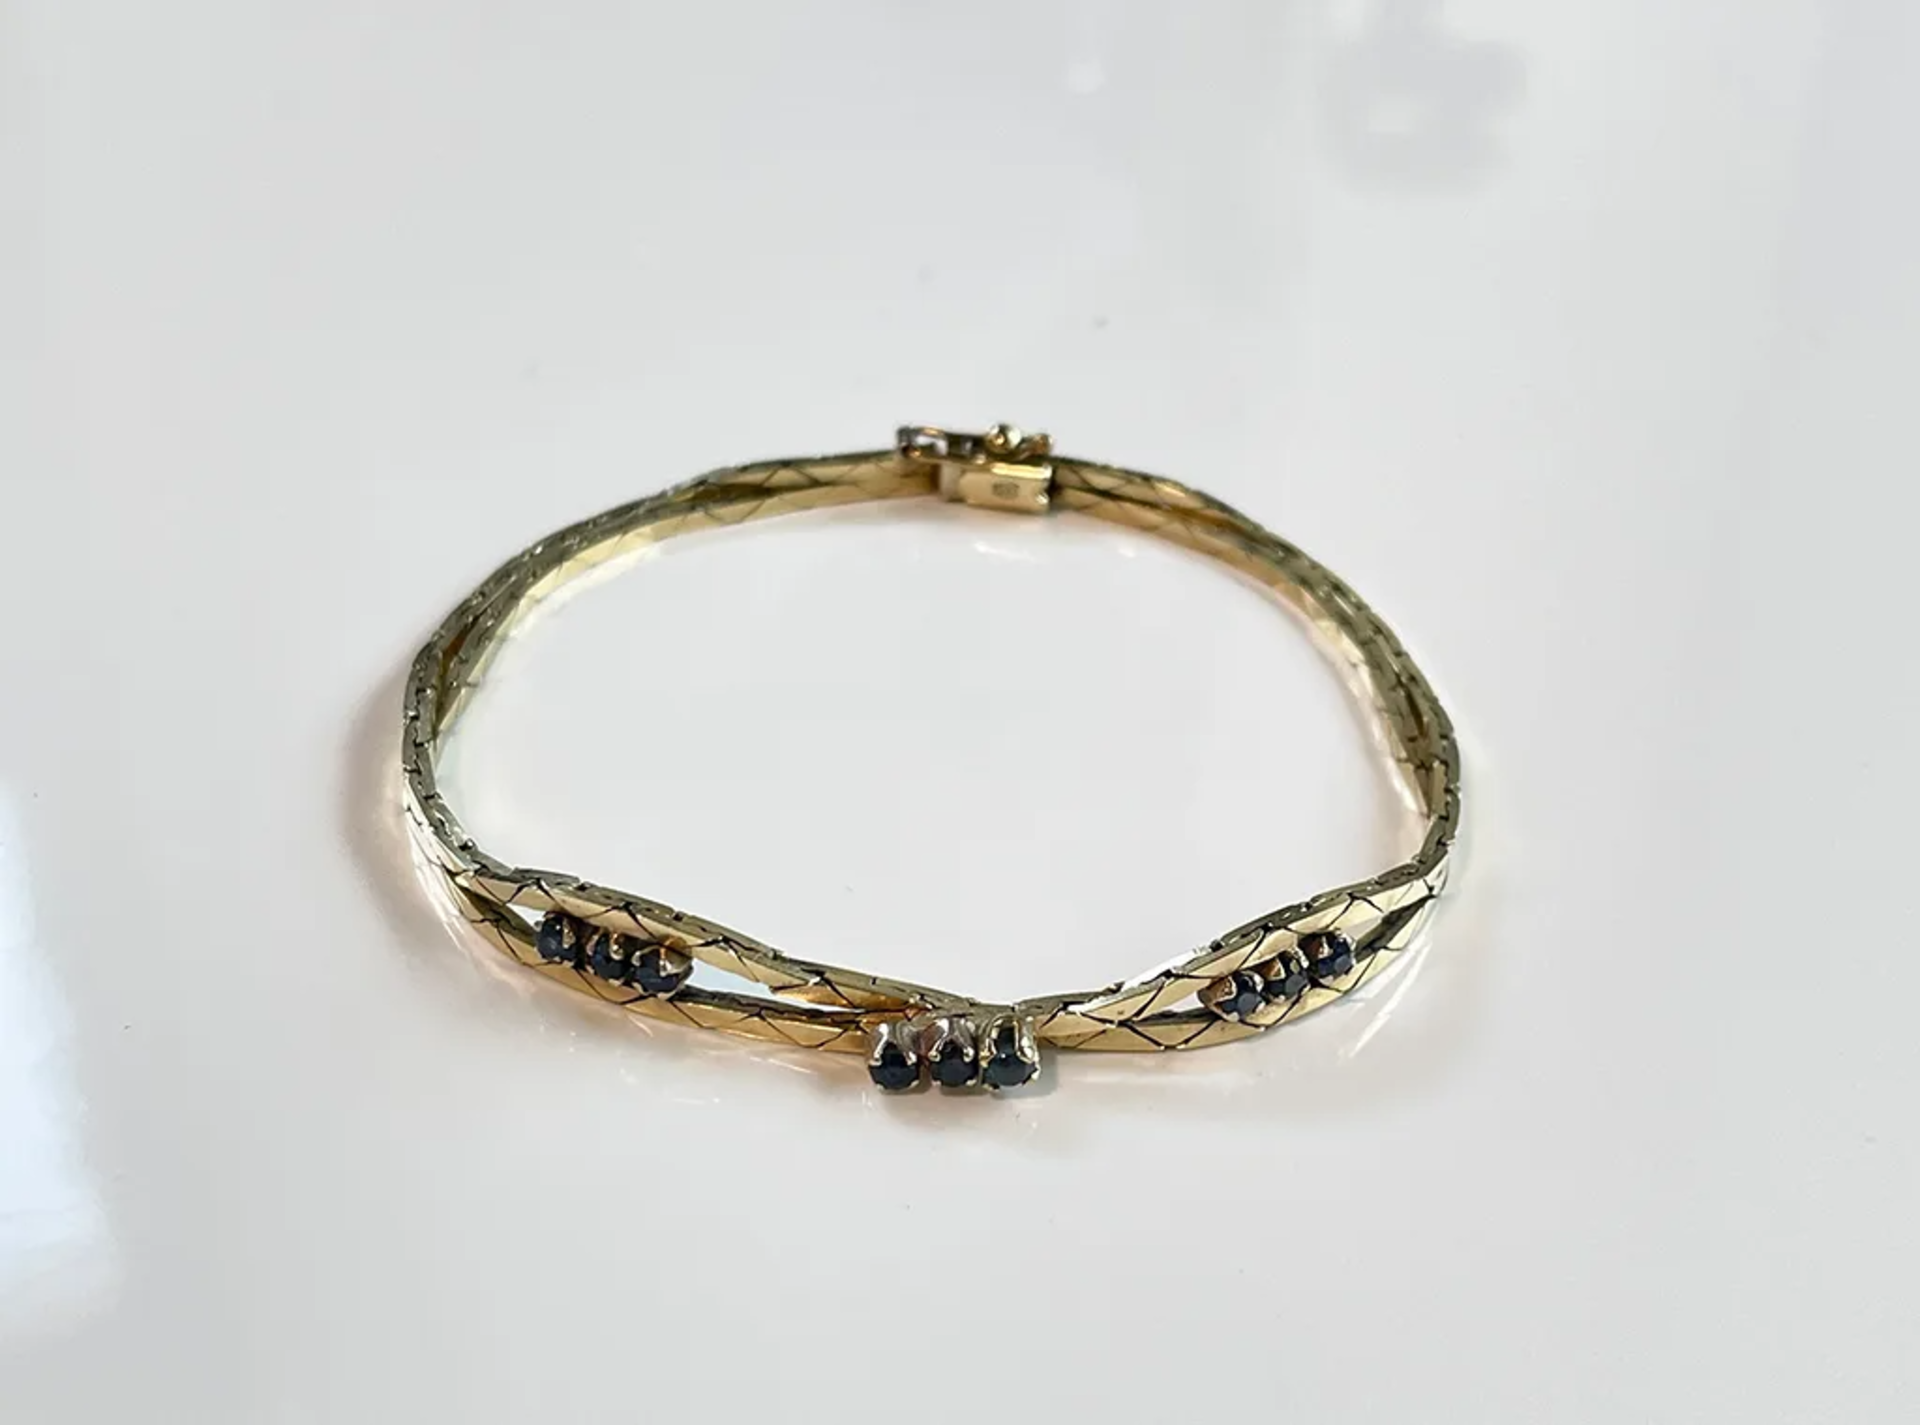 1950's Vintage Bracelet with Blue Sapphires 14K Yellow Gold - Image 3 of 4